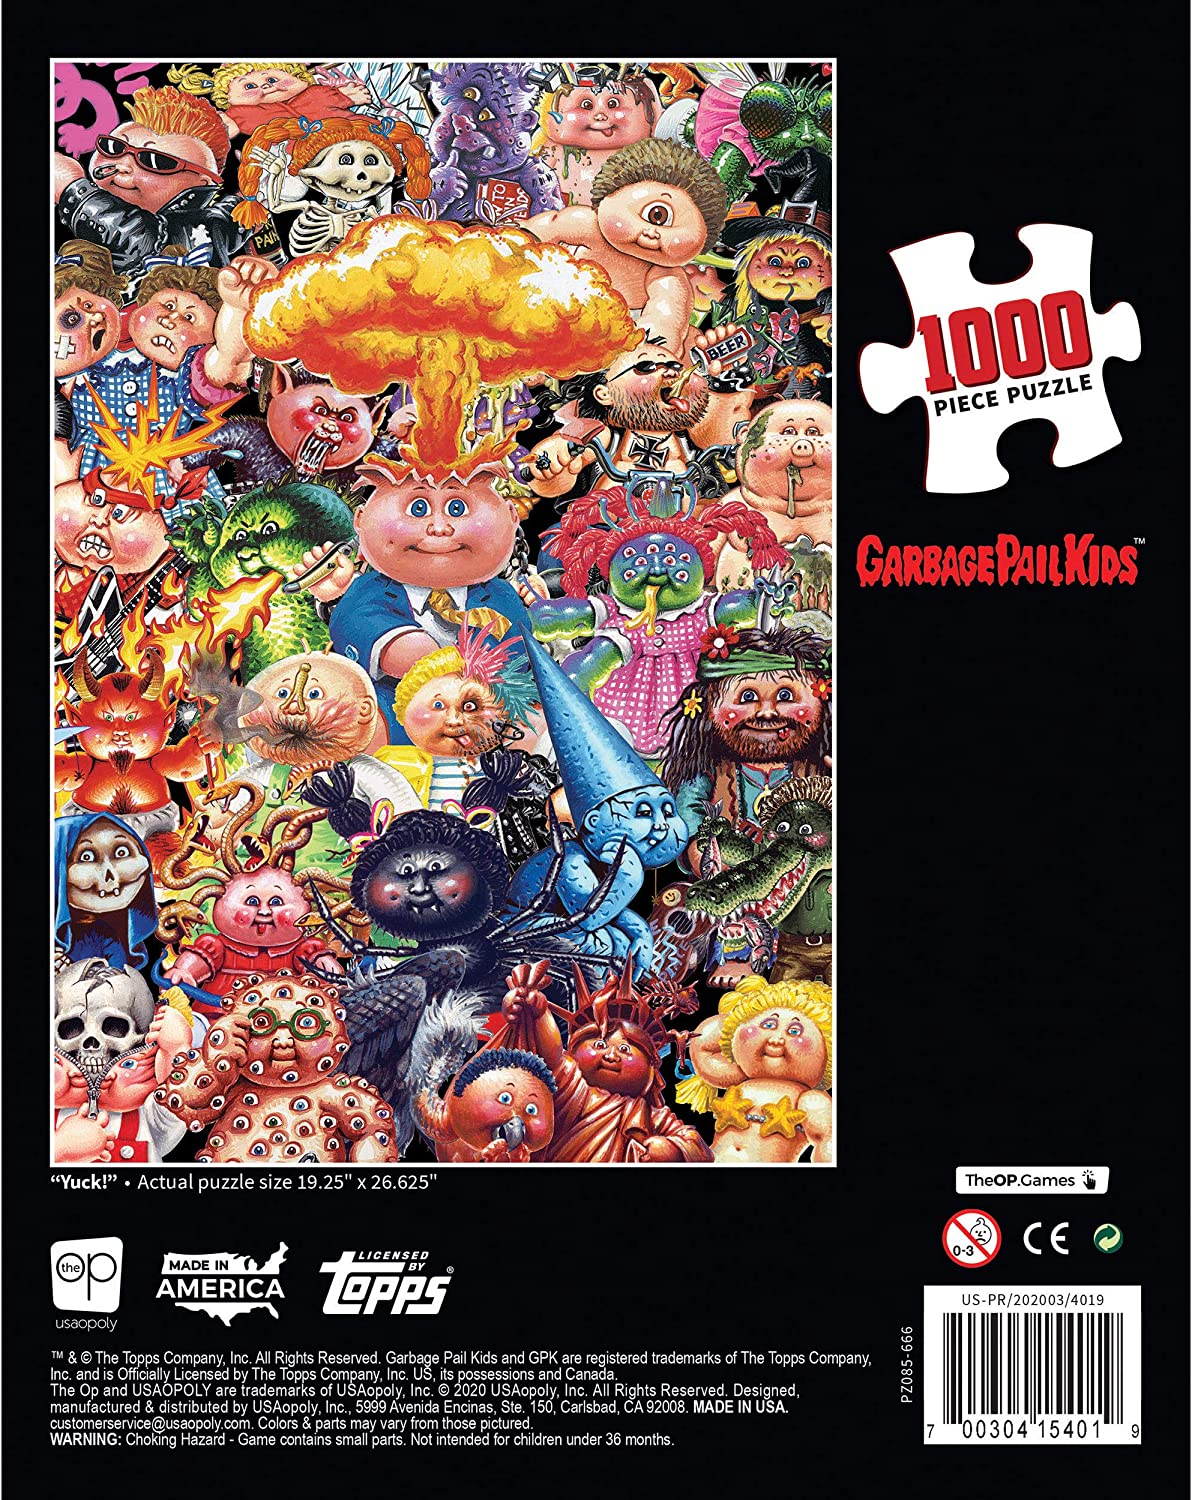 USAOPOLY Garbage Pail Kids Yuck 1000 Piece Jigsaw Puzzle | Collectible Puzzle Featuring Original GPK Favorites